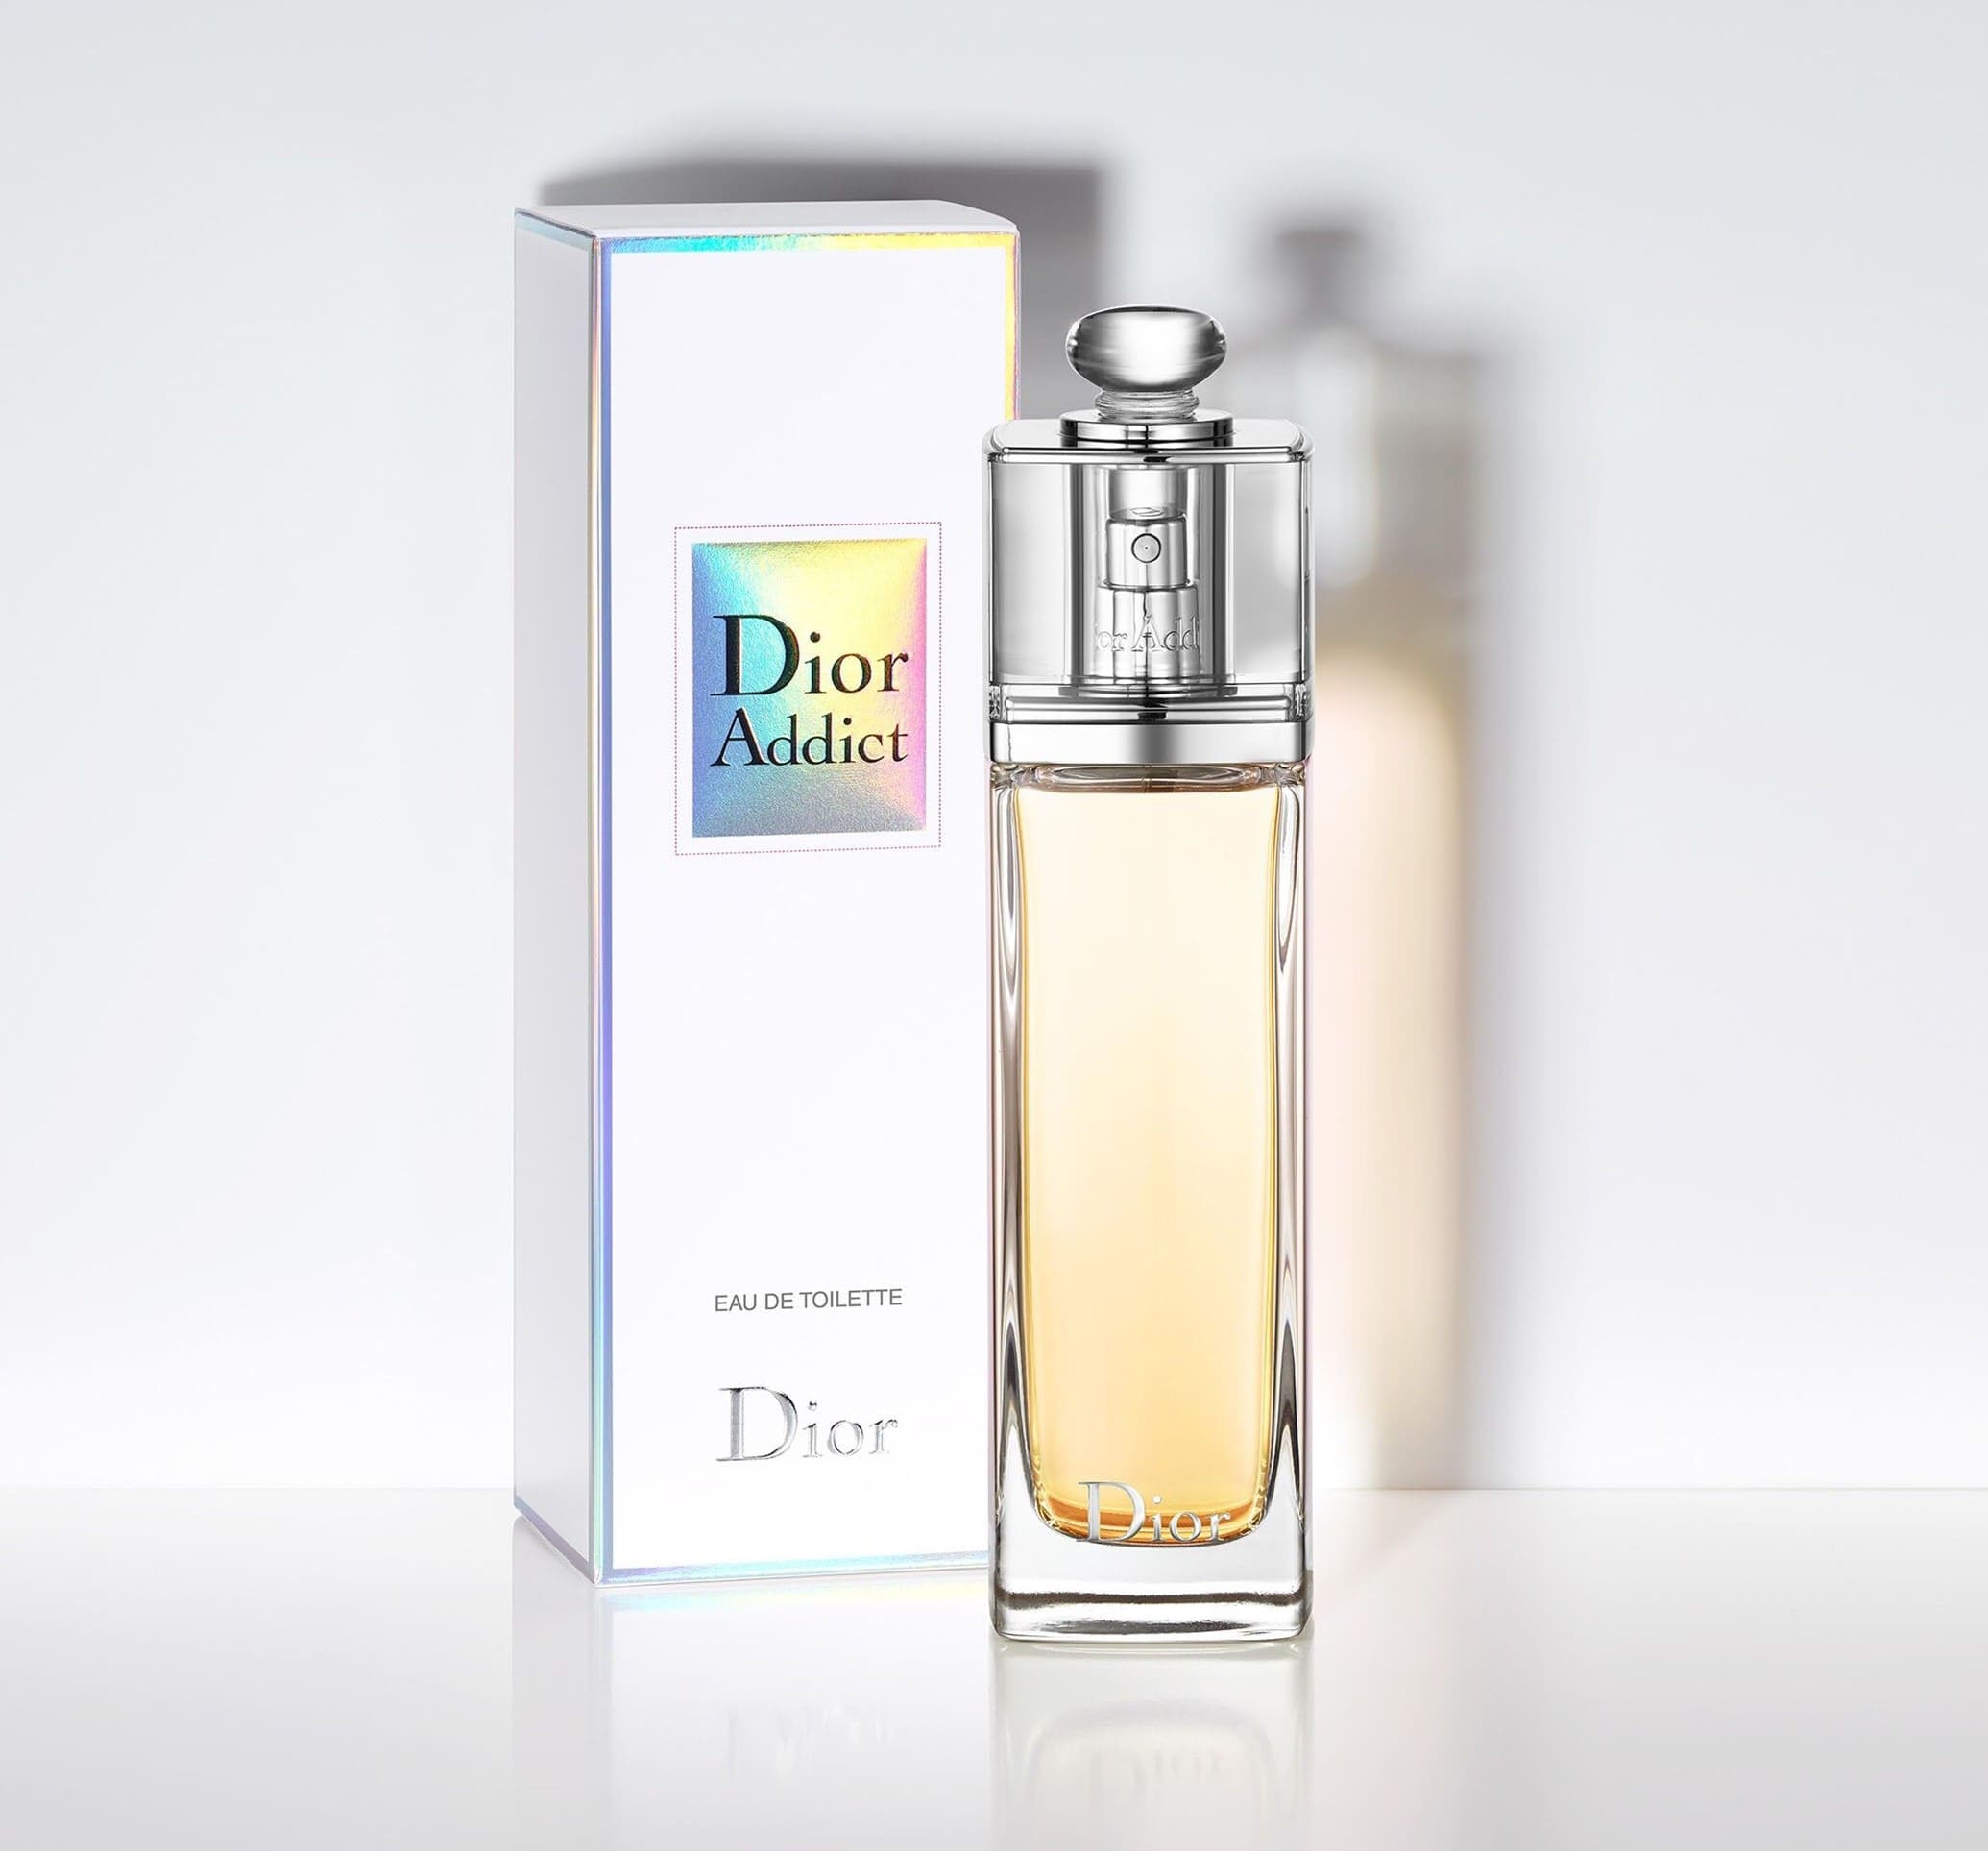 Dior Addict EDT Perfume for Women by Dior